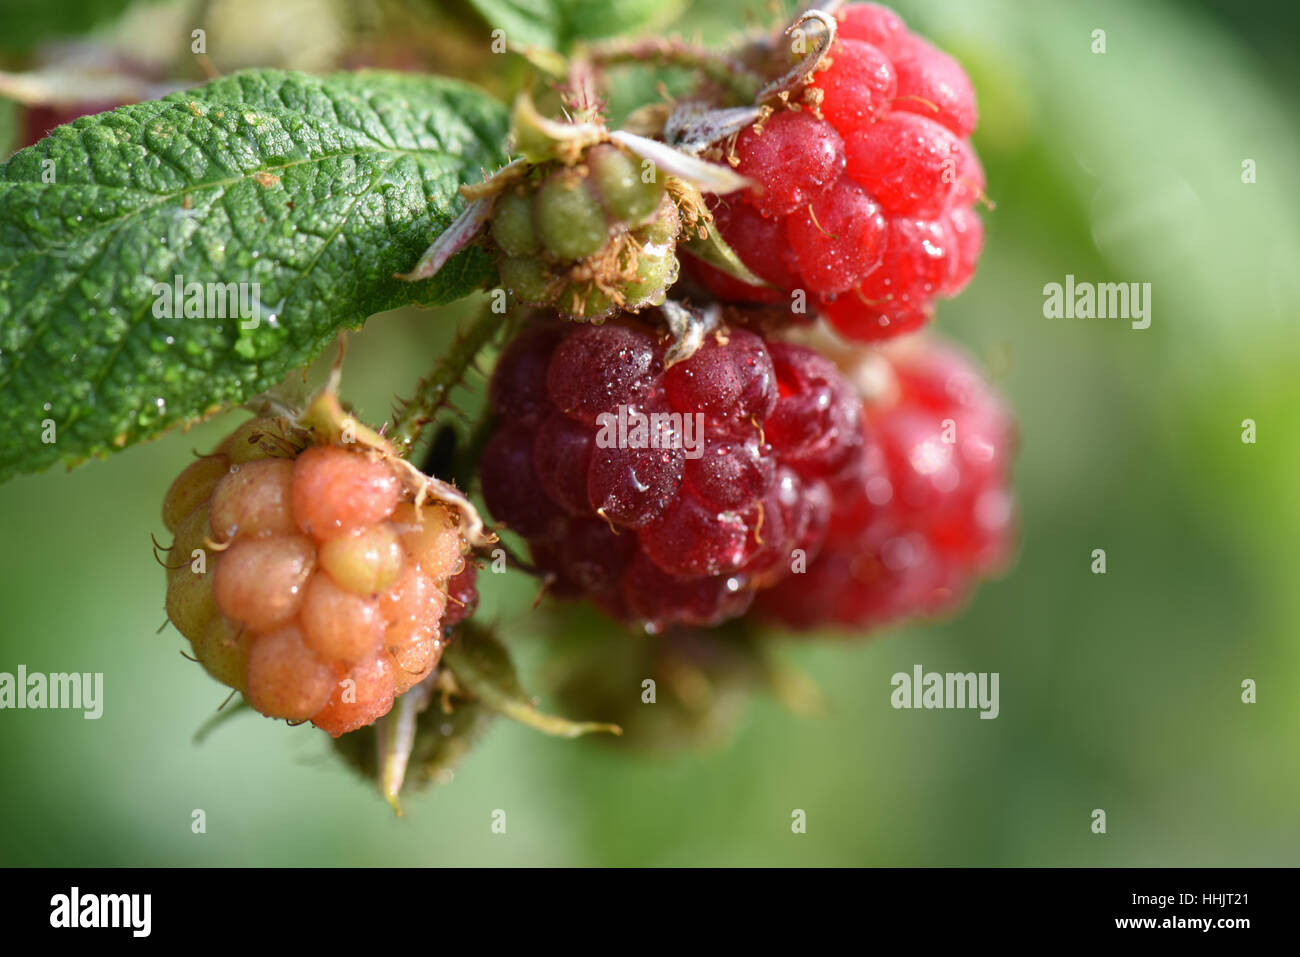 Raspberries fruit stages photography Alamy - images hi-res stock and